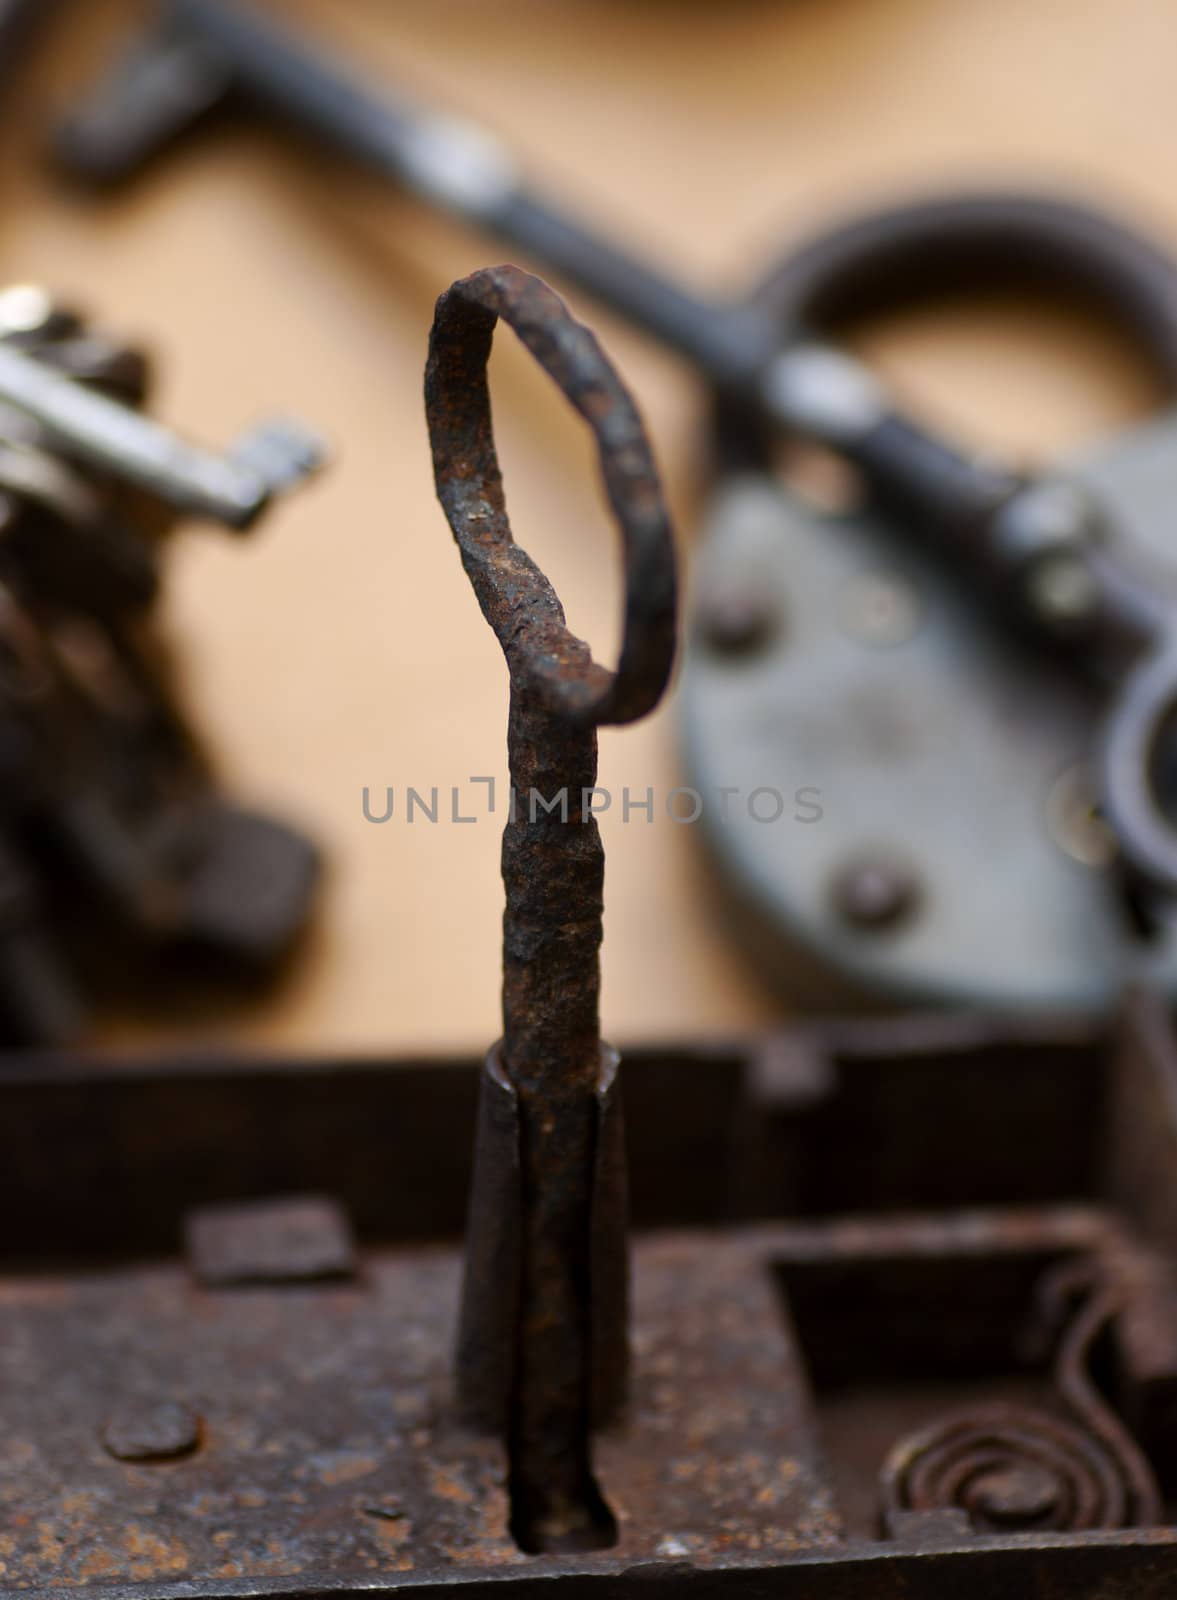 An old and rusty lock and key